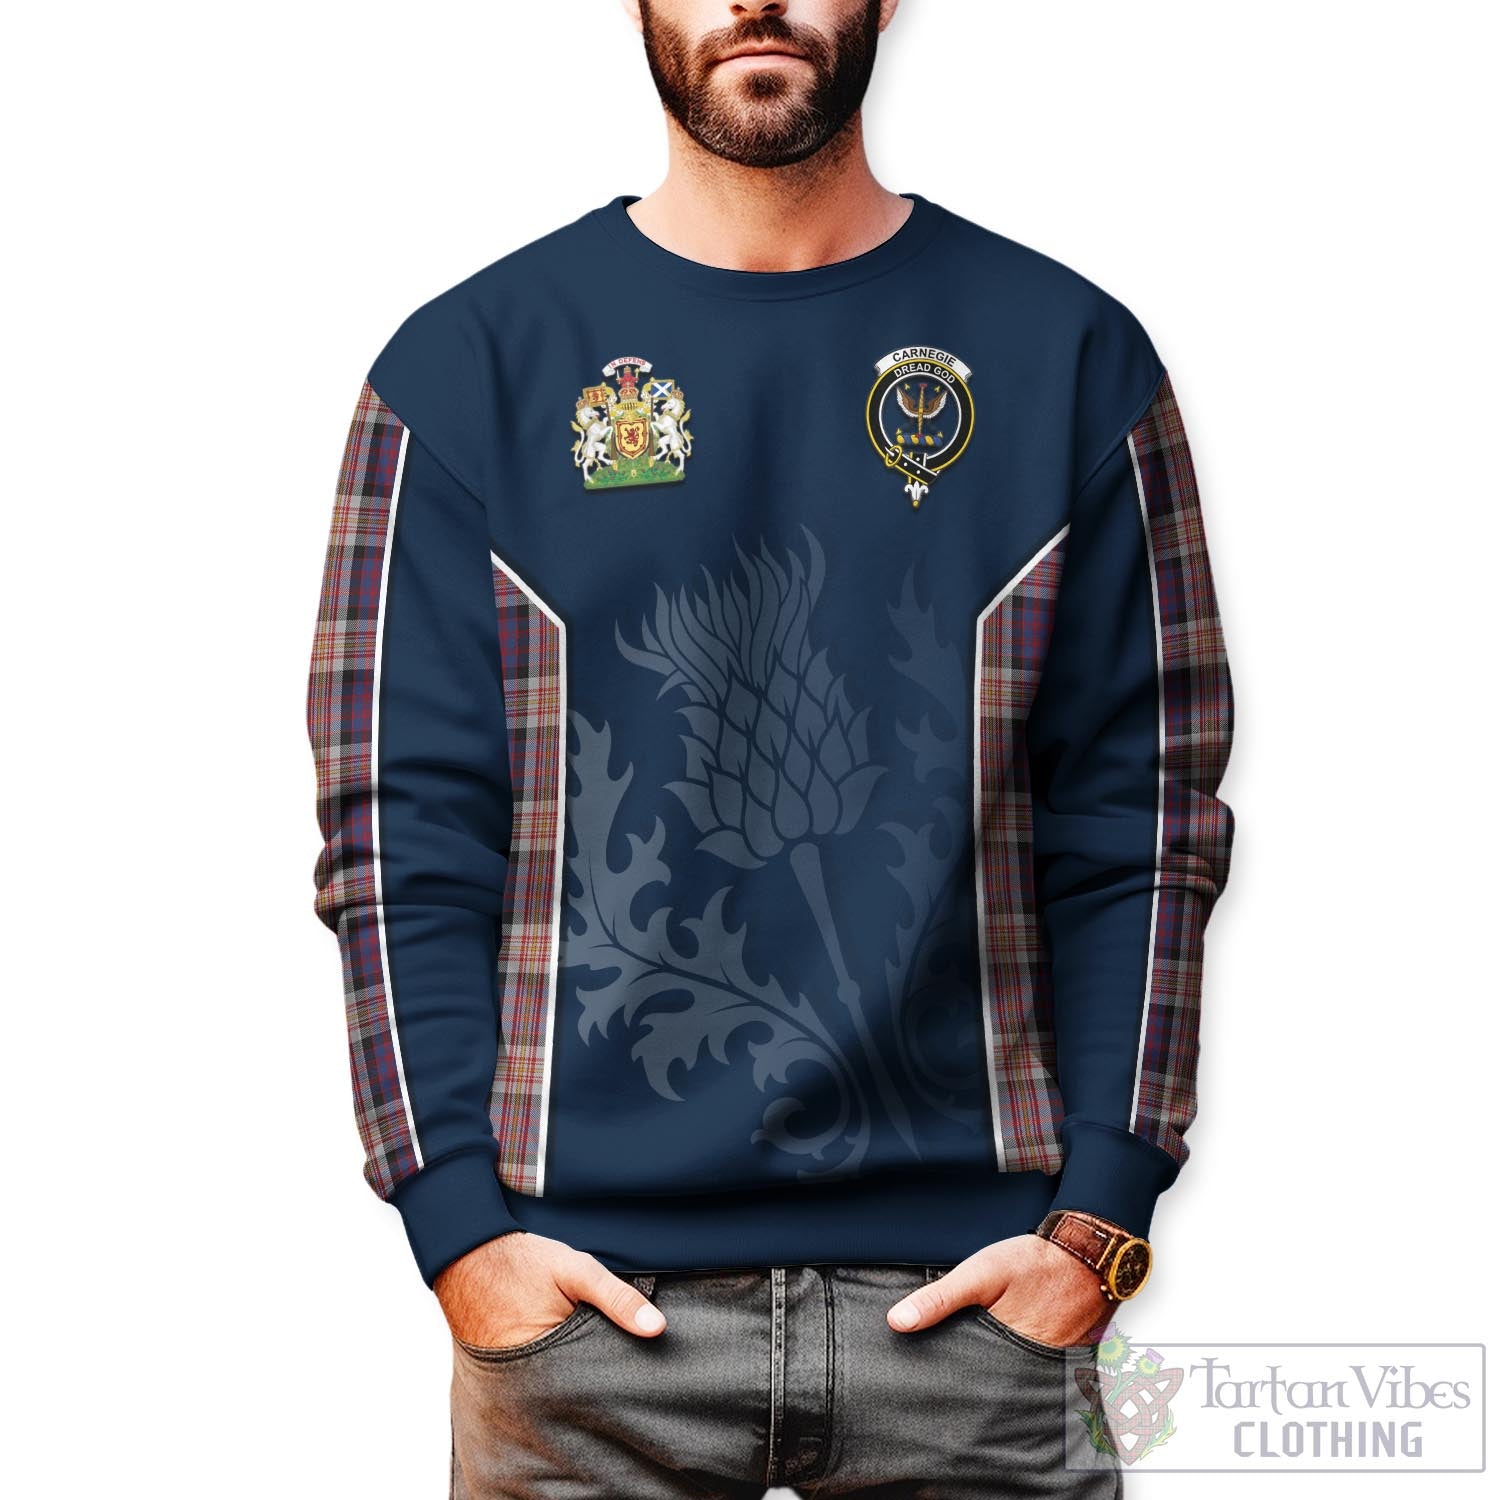 Tartan Vibes Clothing Carnegie Tartan Sweatshirt with Family Crest and Scottish Thistle Vibes Sport Style